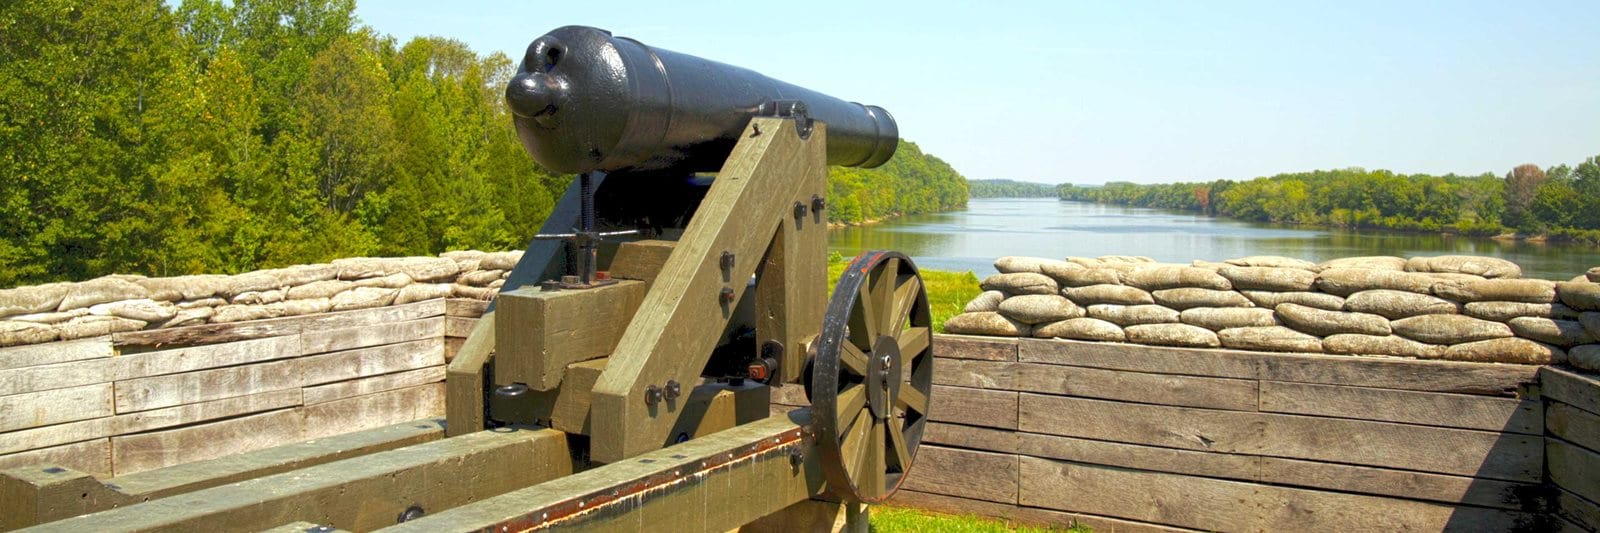 Fort Donelson